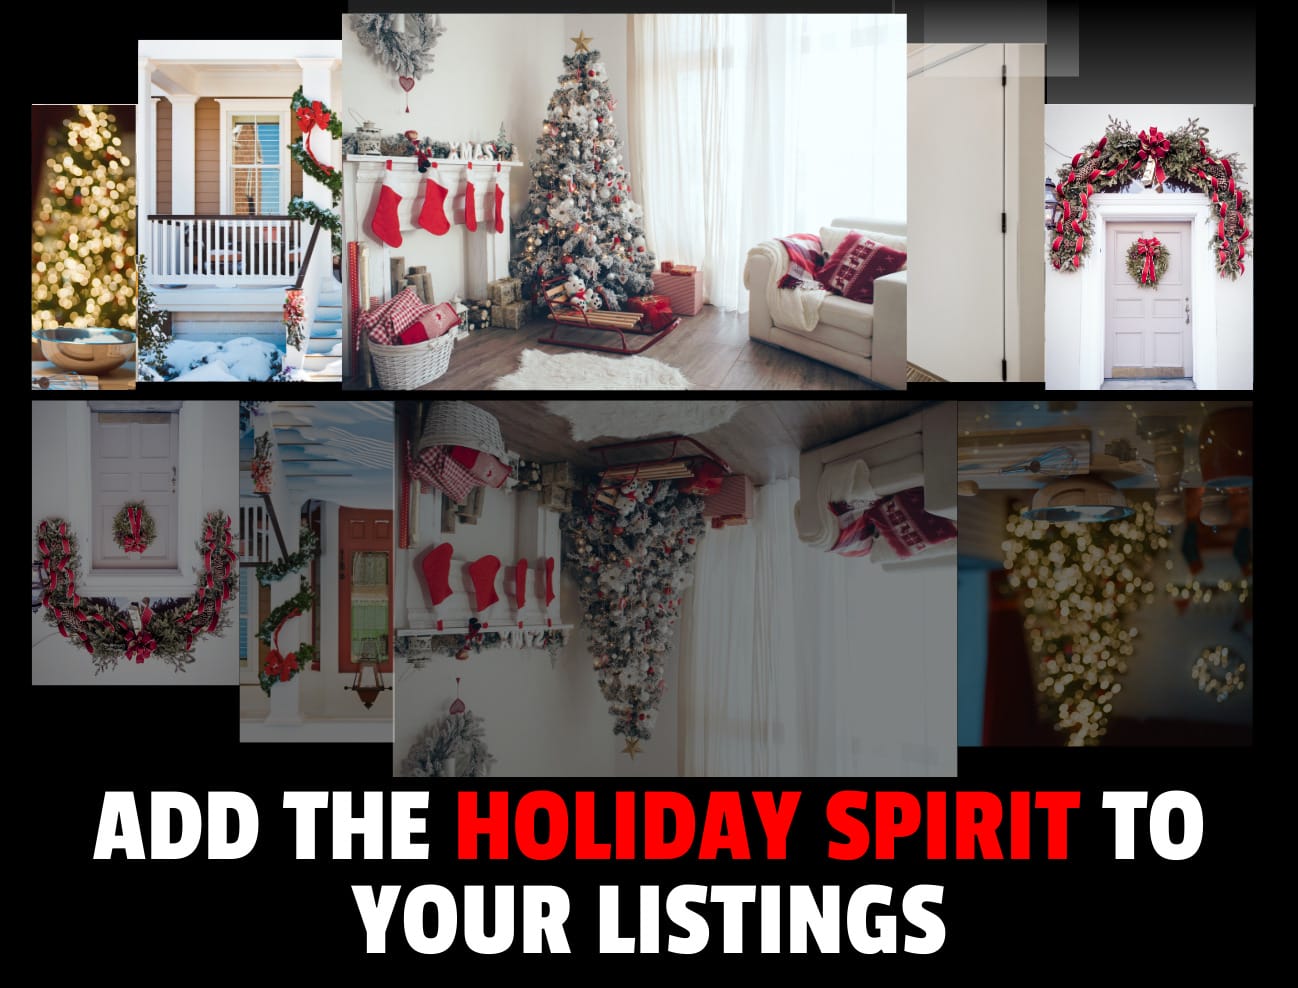 Spreading Holiday Cheer: 5 Fun Ways to Get Your Listing Sold Sooner!